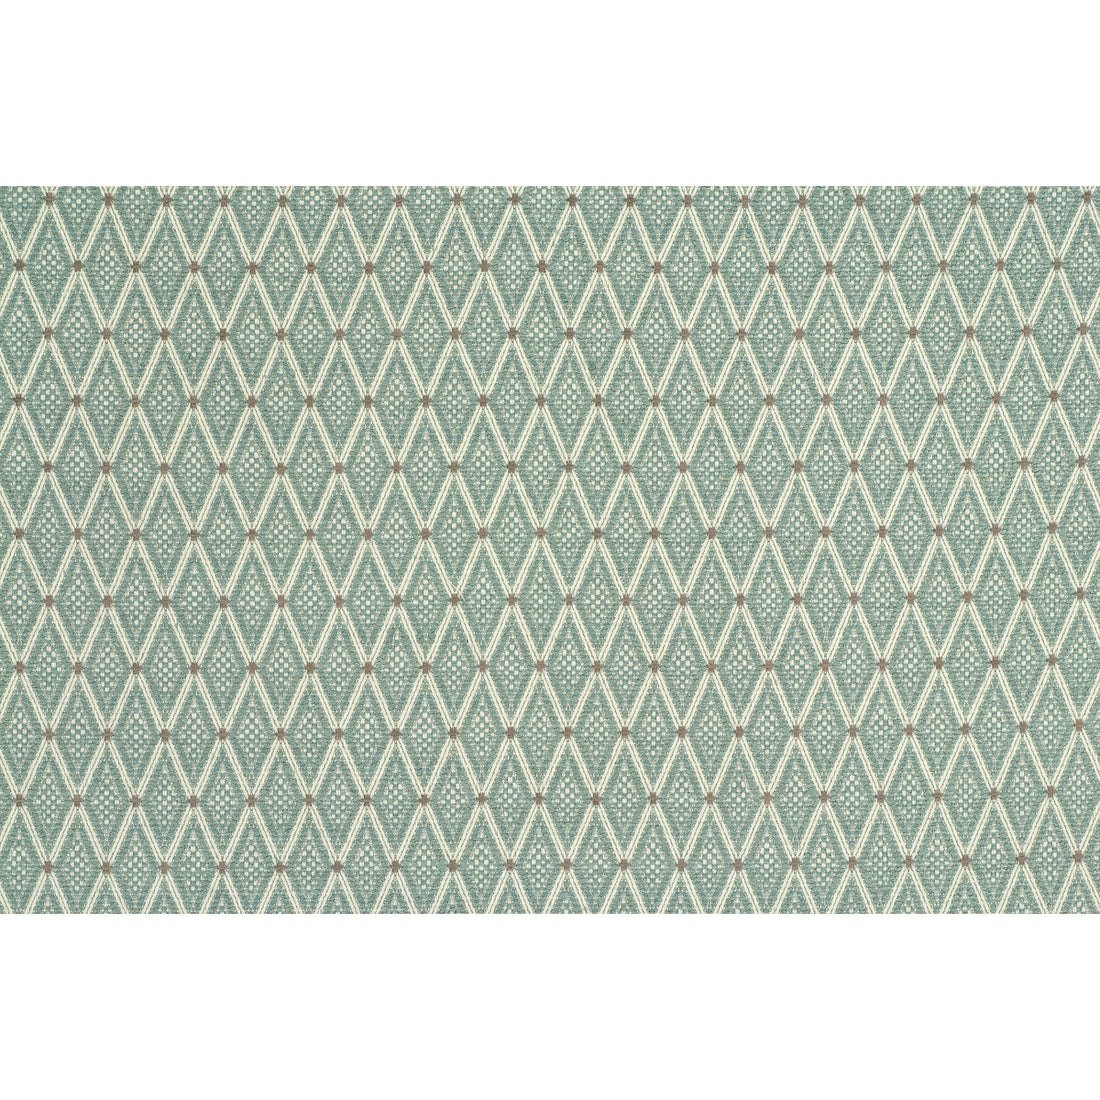 Kravet Contract fabric in 34744-23 color - pattern 34744.23.0 - by Kravet Contract in the Crypton Incase collection